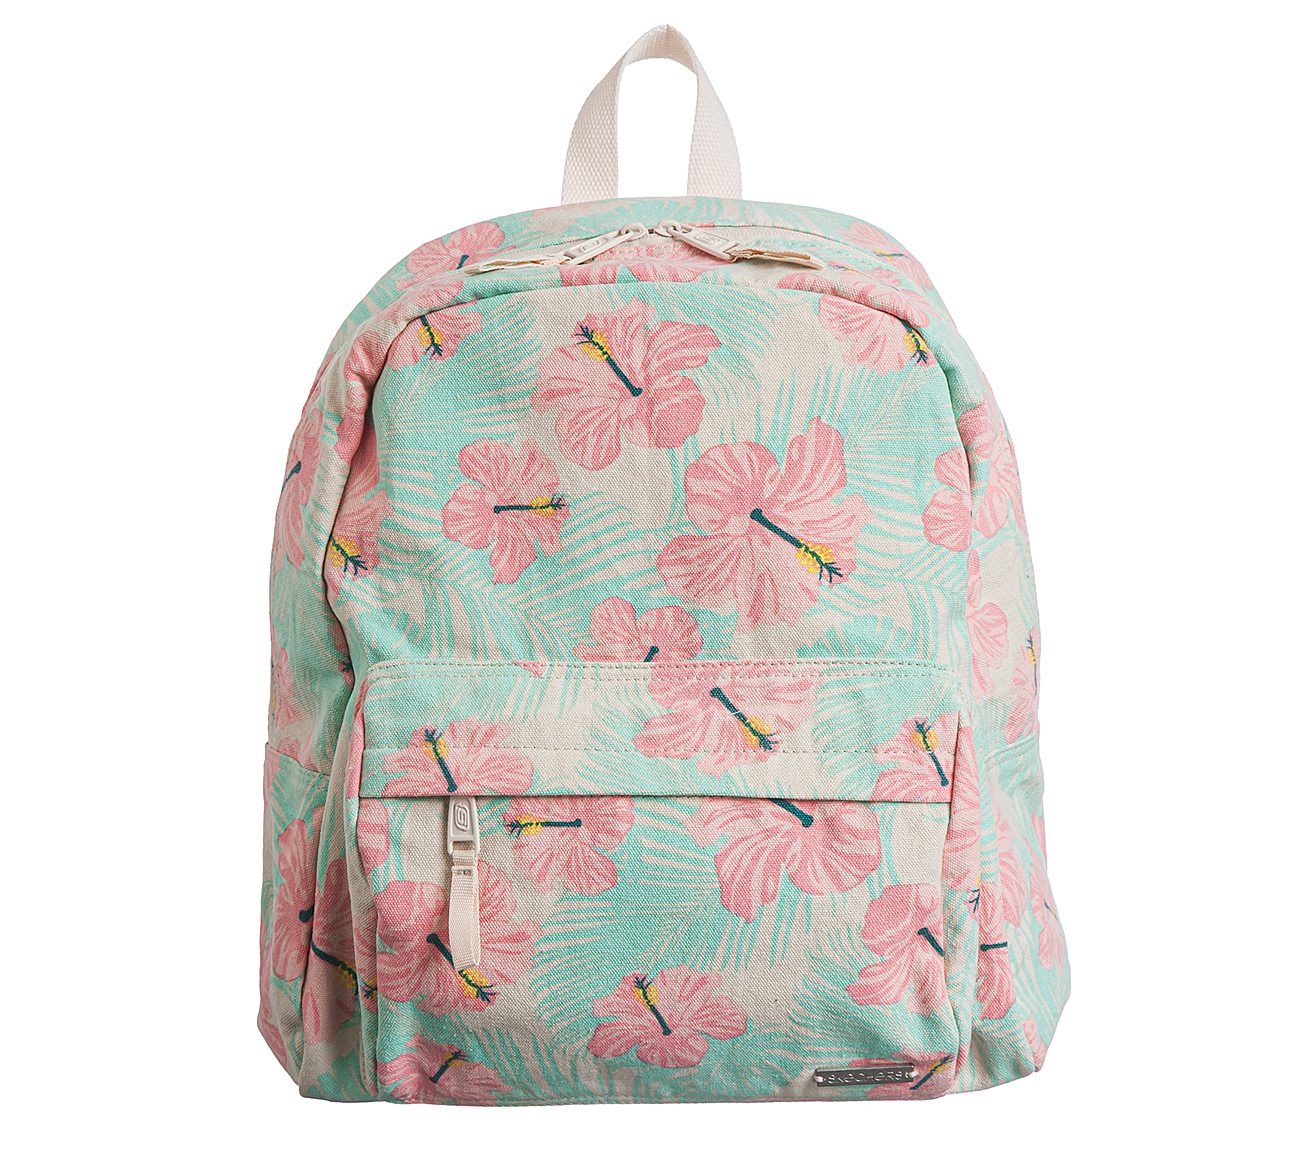 Buy SKECHERS Floral Canvas Backpack Accessories Shoes